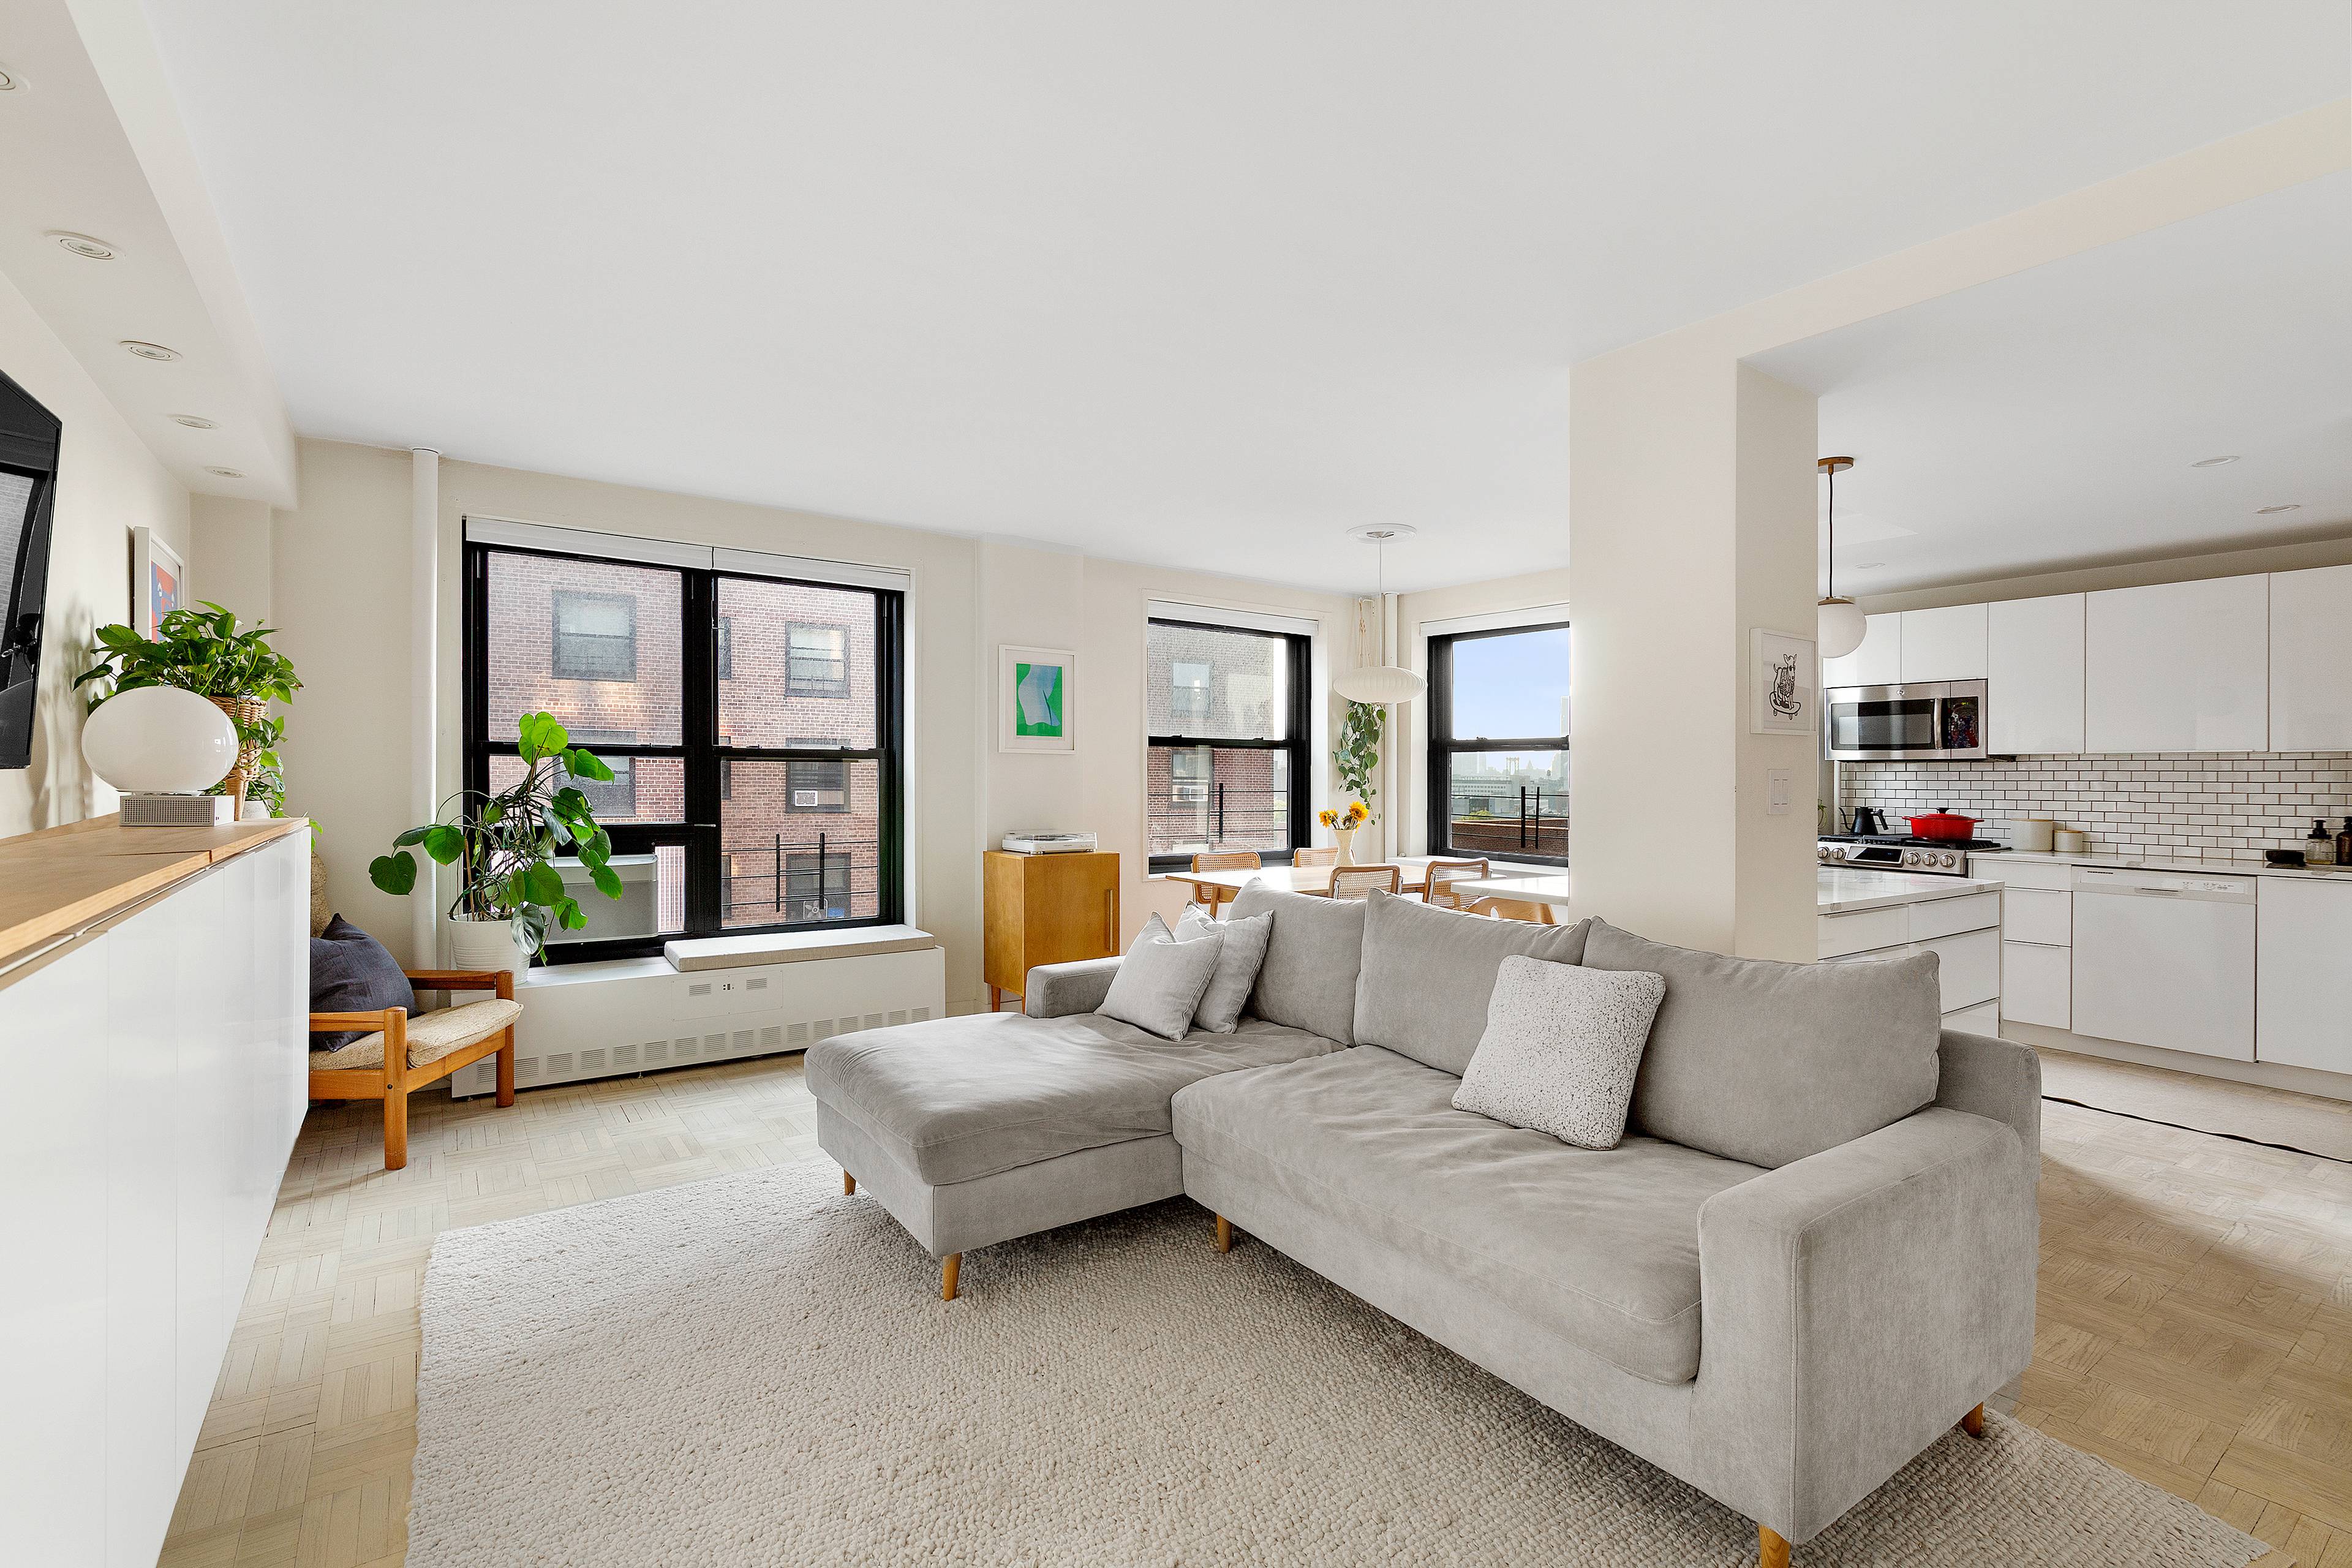 Newly renovated large 1 bedroom, dining area with Manhattan views.